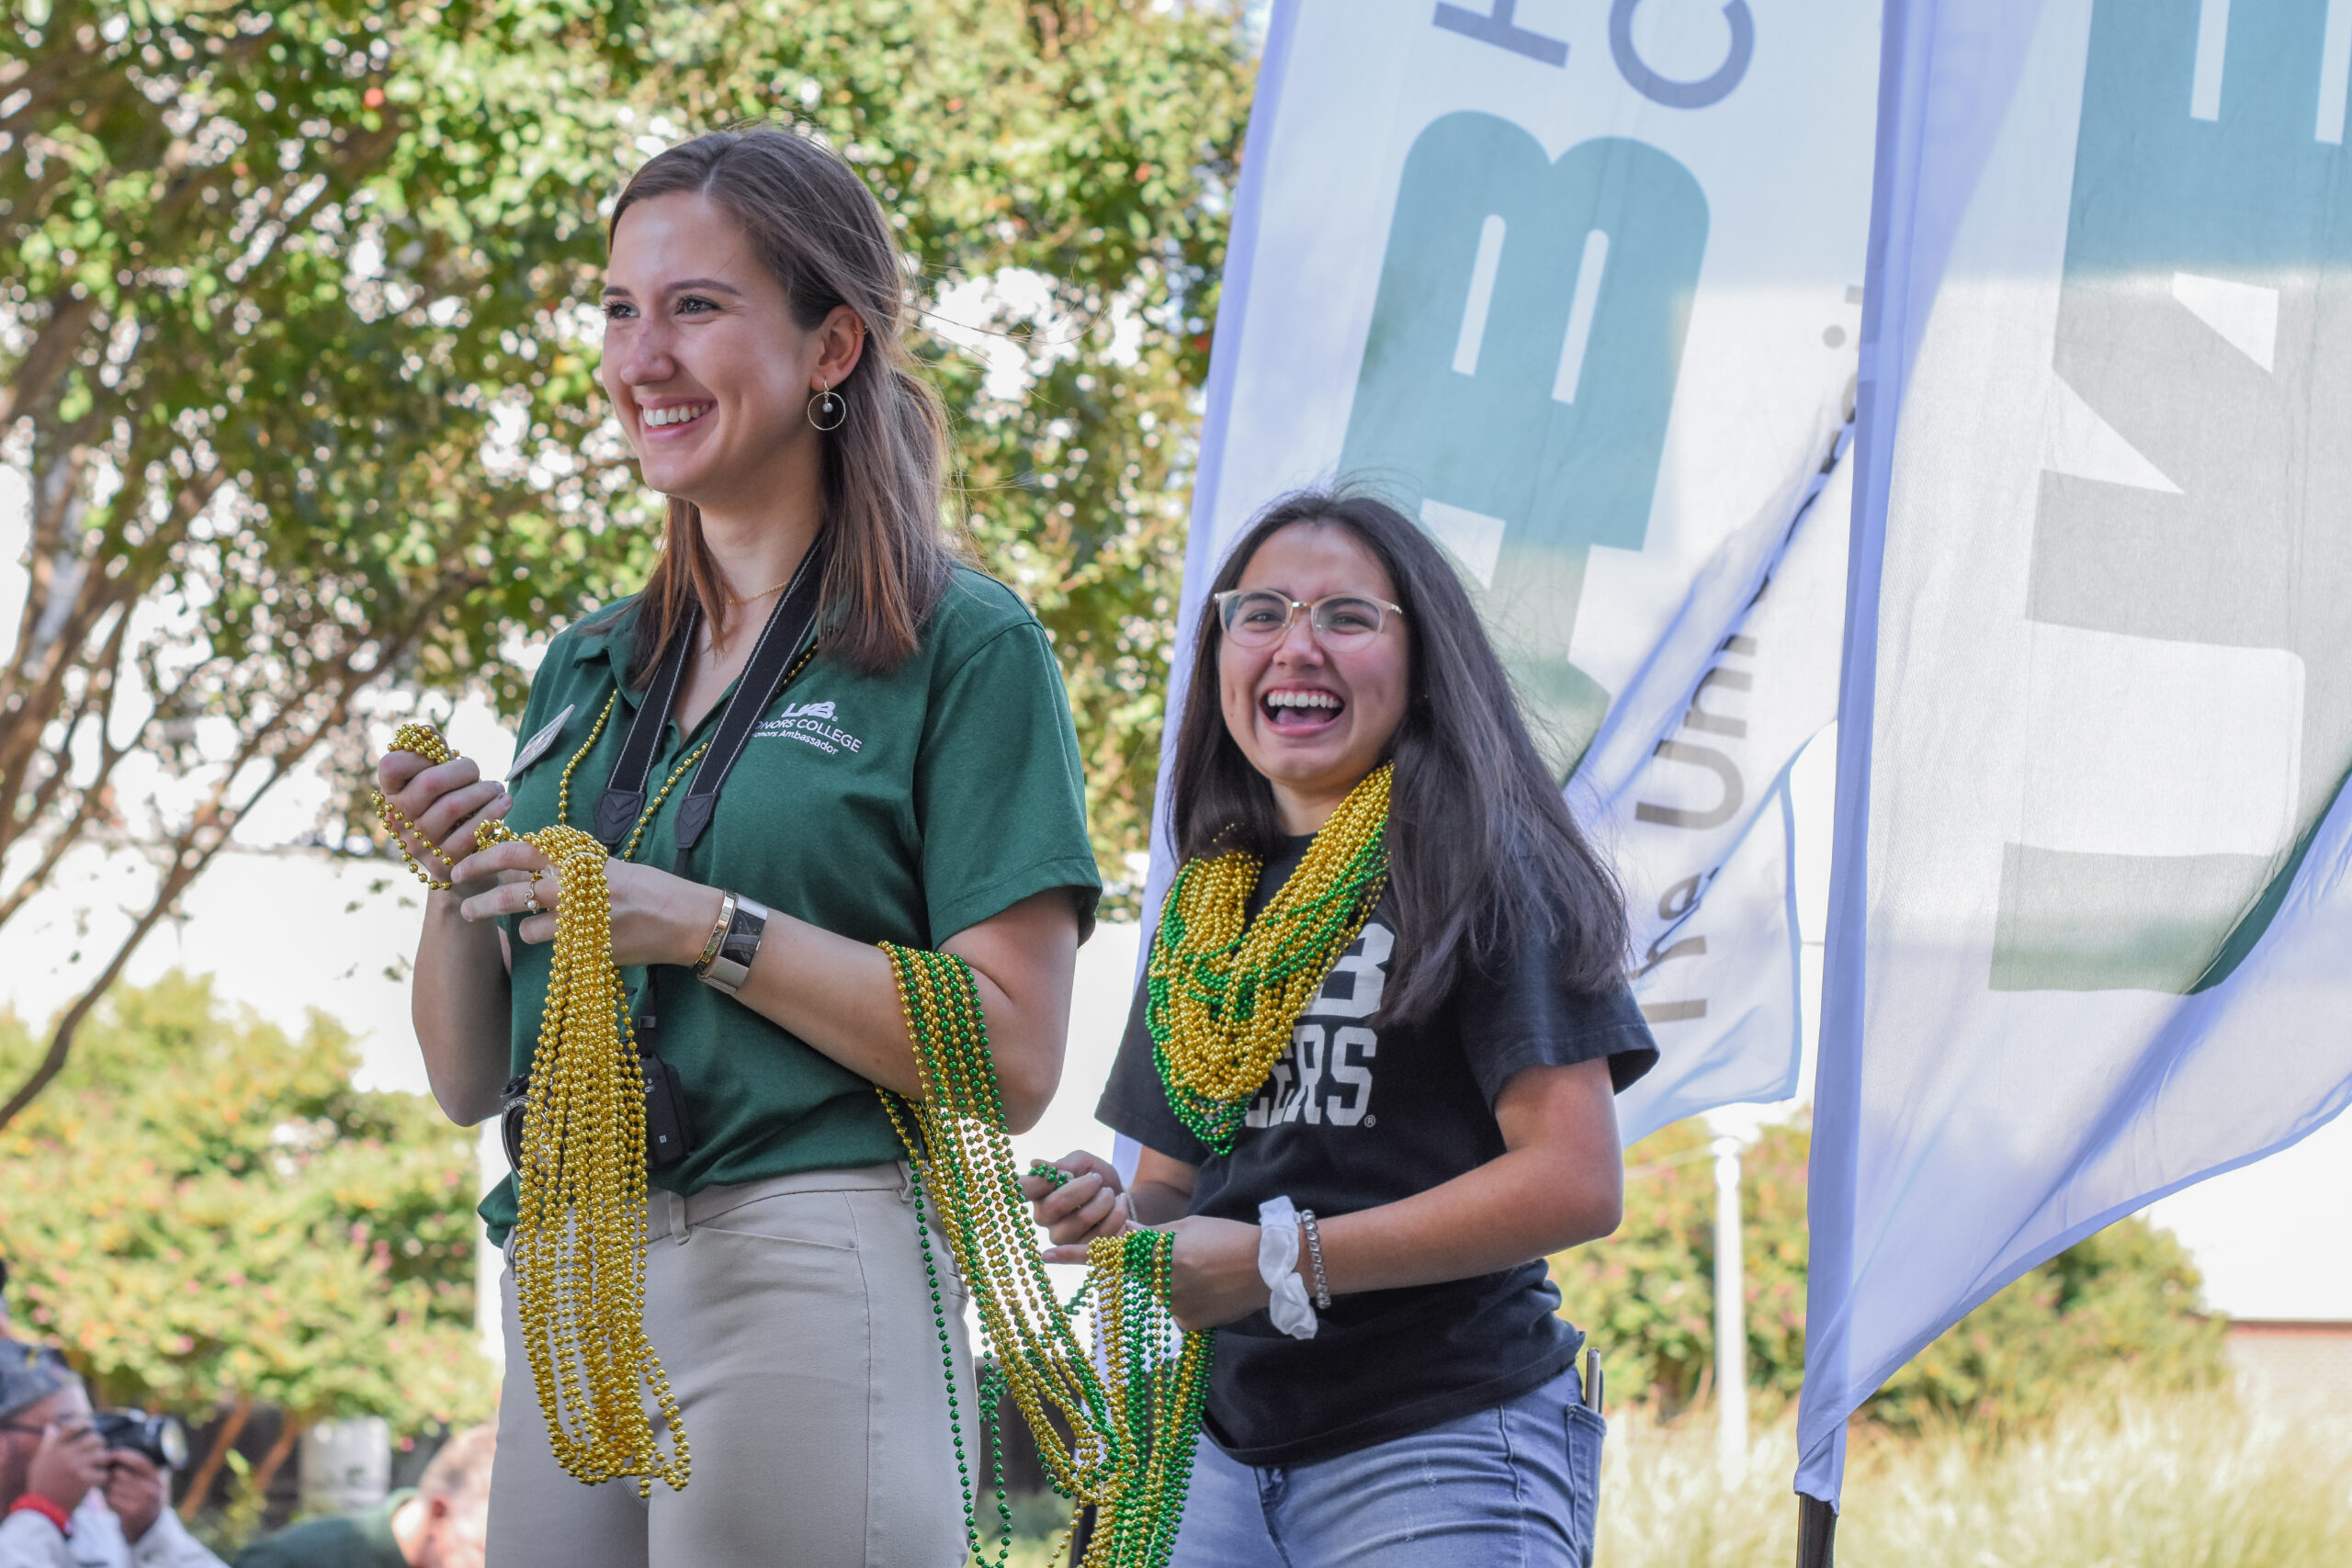 Show your school spirit by attending these events UAB